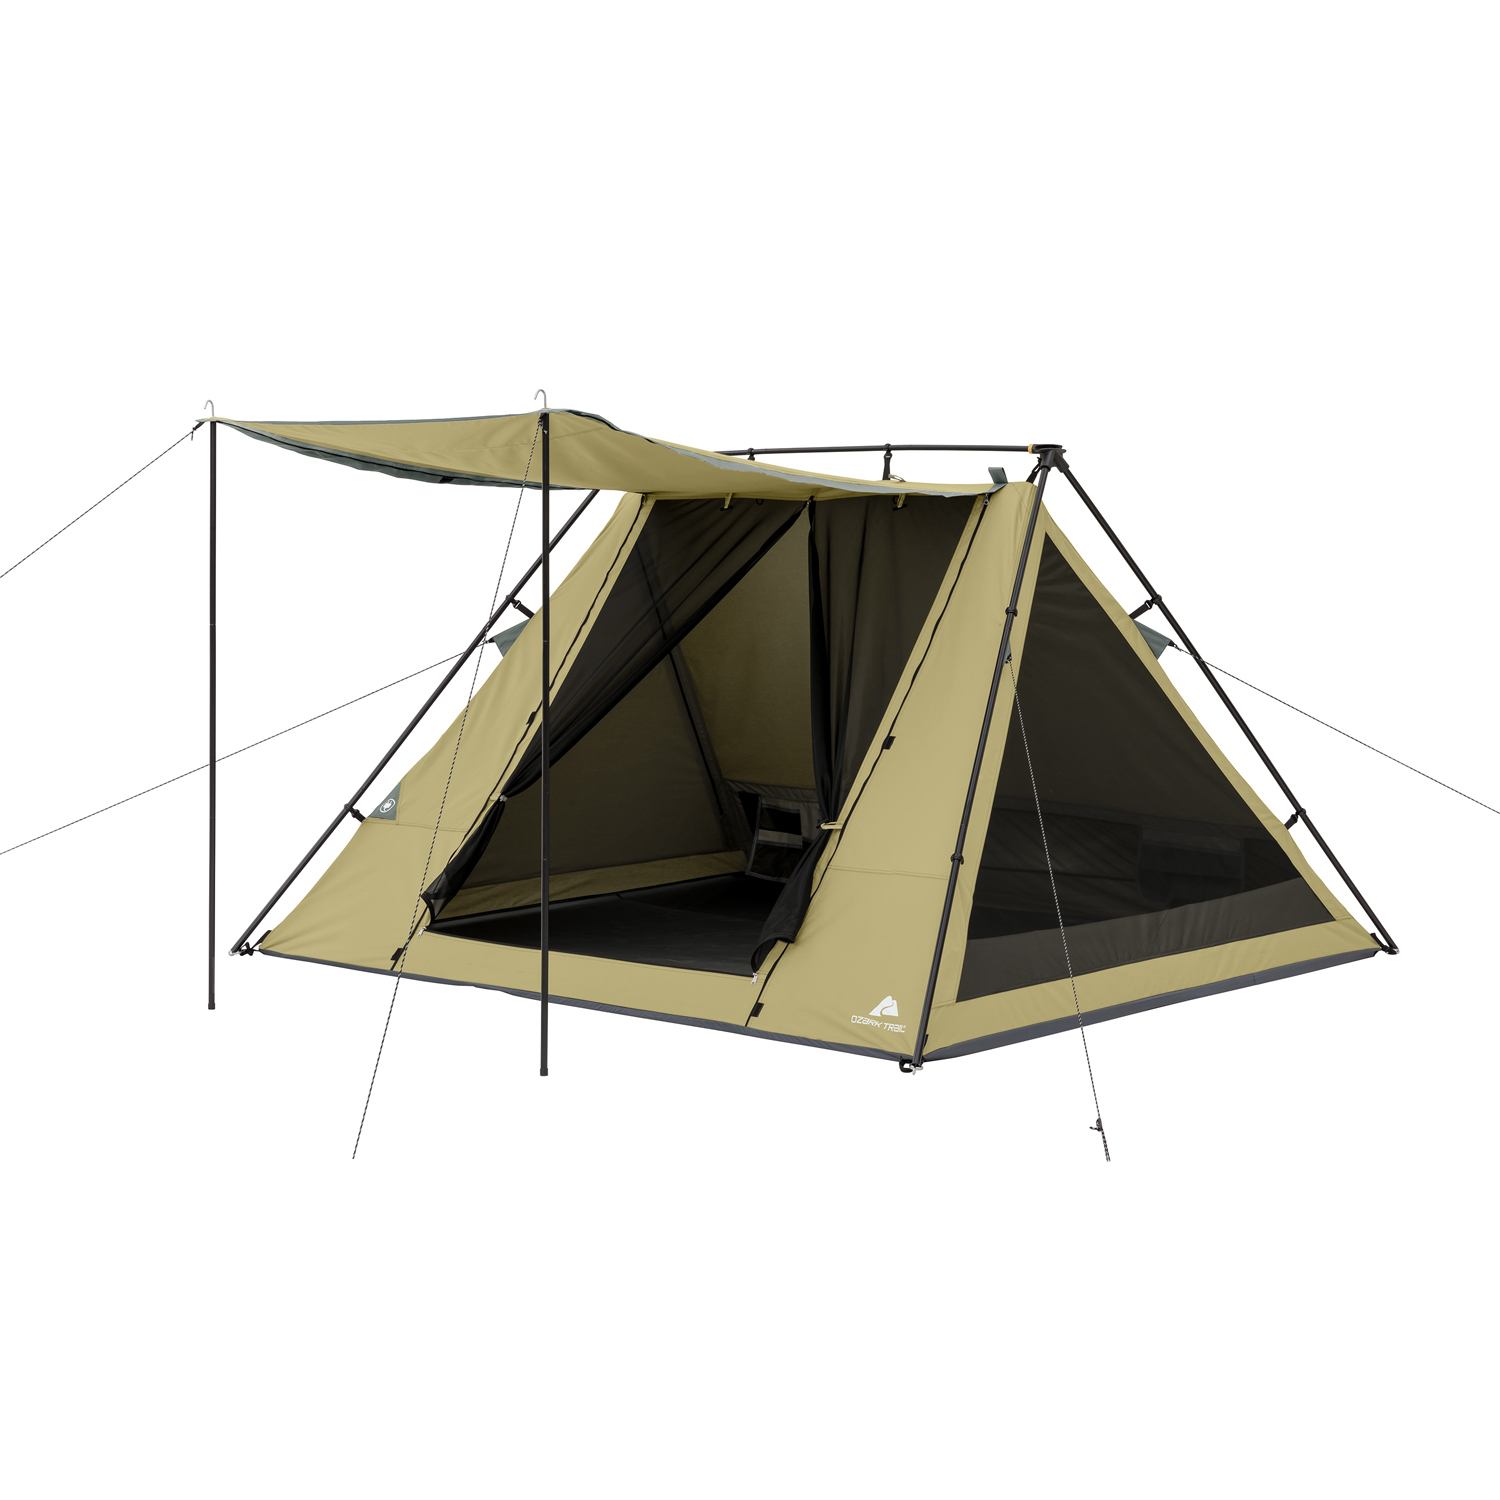 Ozark Trail 8’ x 7’ 4-Person A-Frame Tent with Awning - image 1 of 6